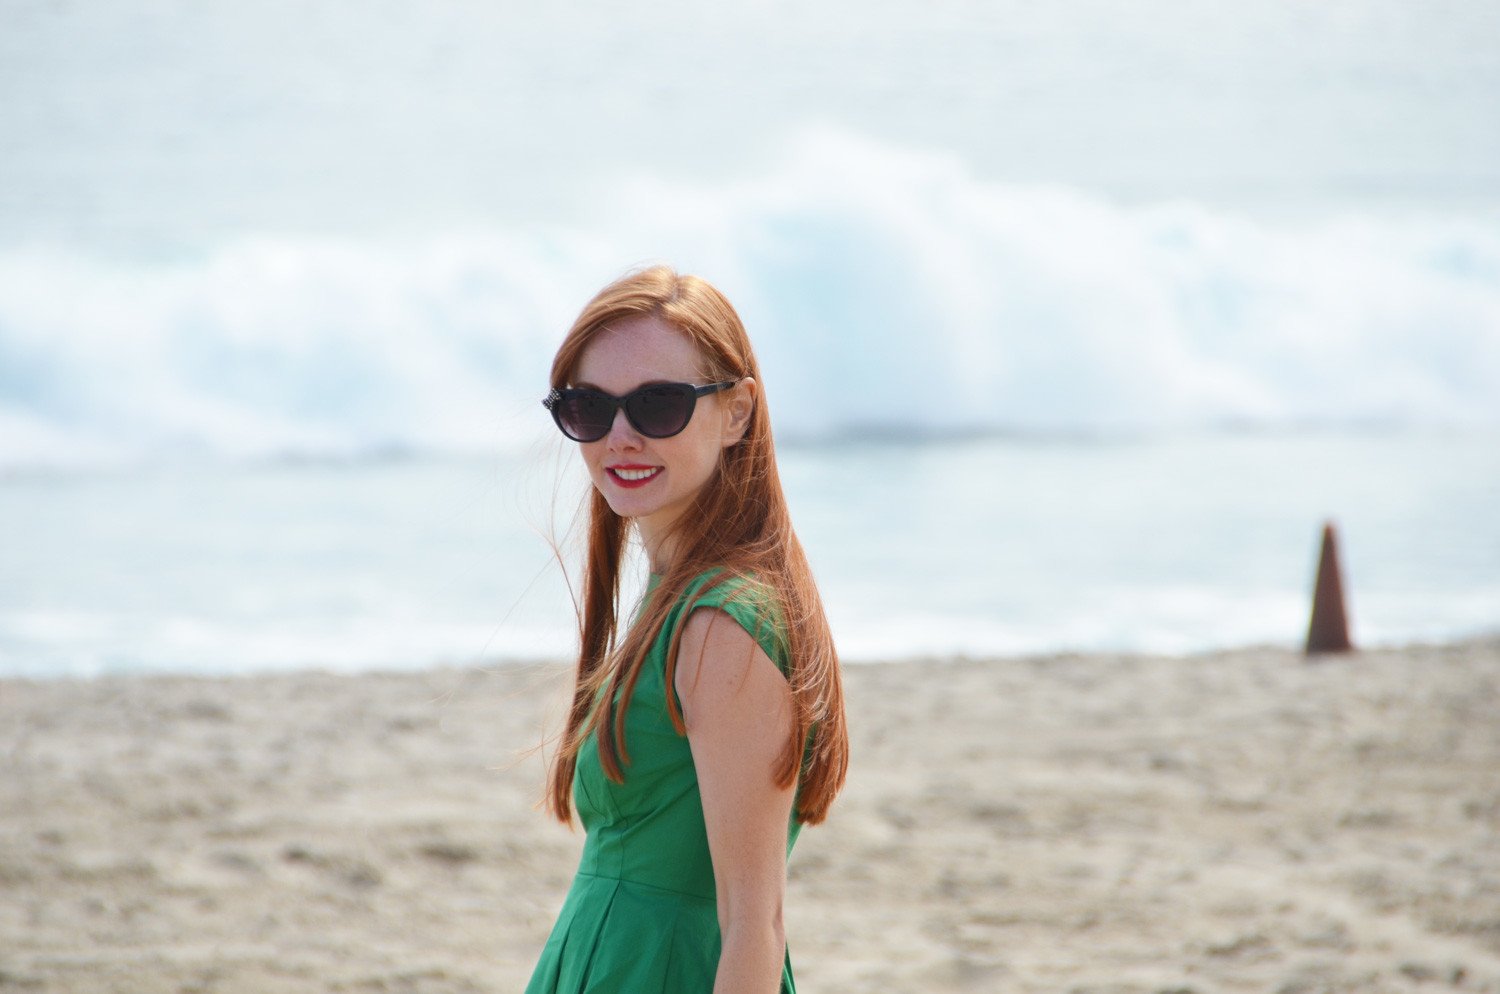 redhead in fgreen dress on the beach